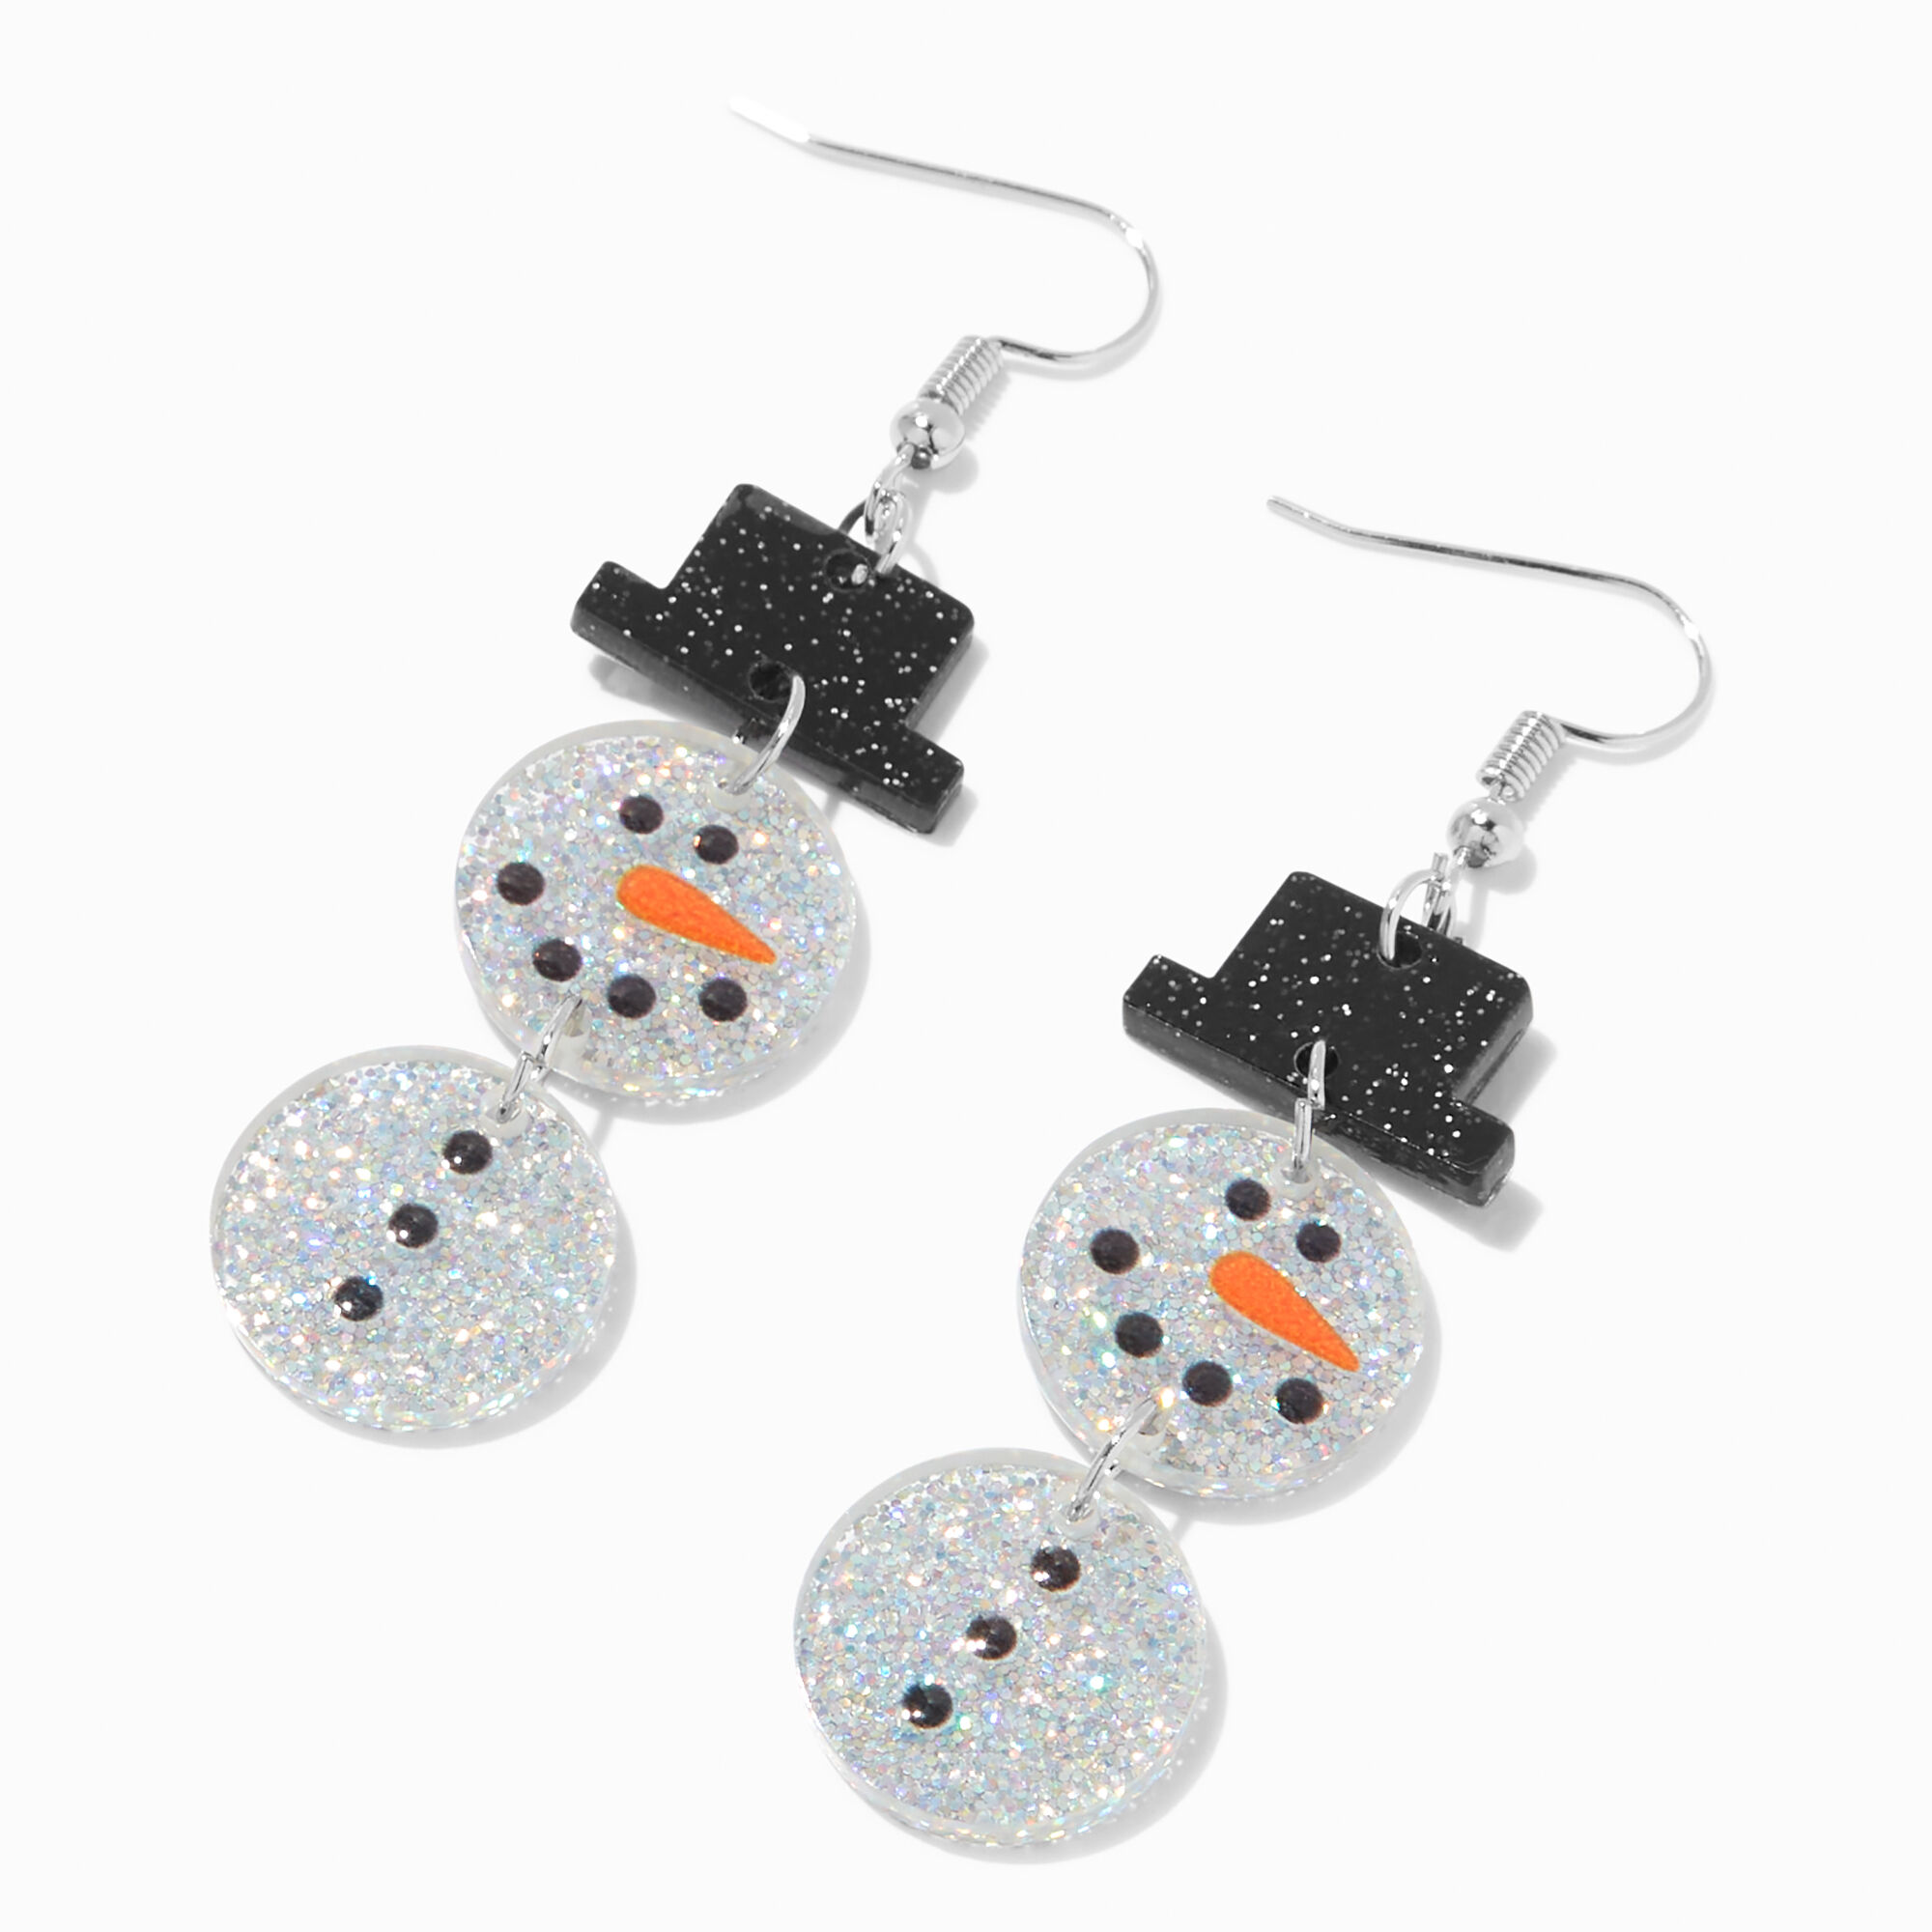 View Claires Glittery Hinged Snowman 2 Drop Earrings information